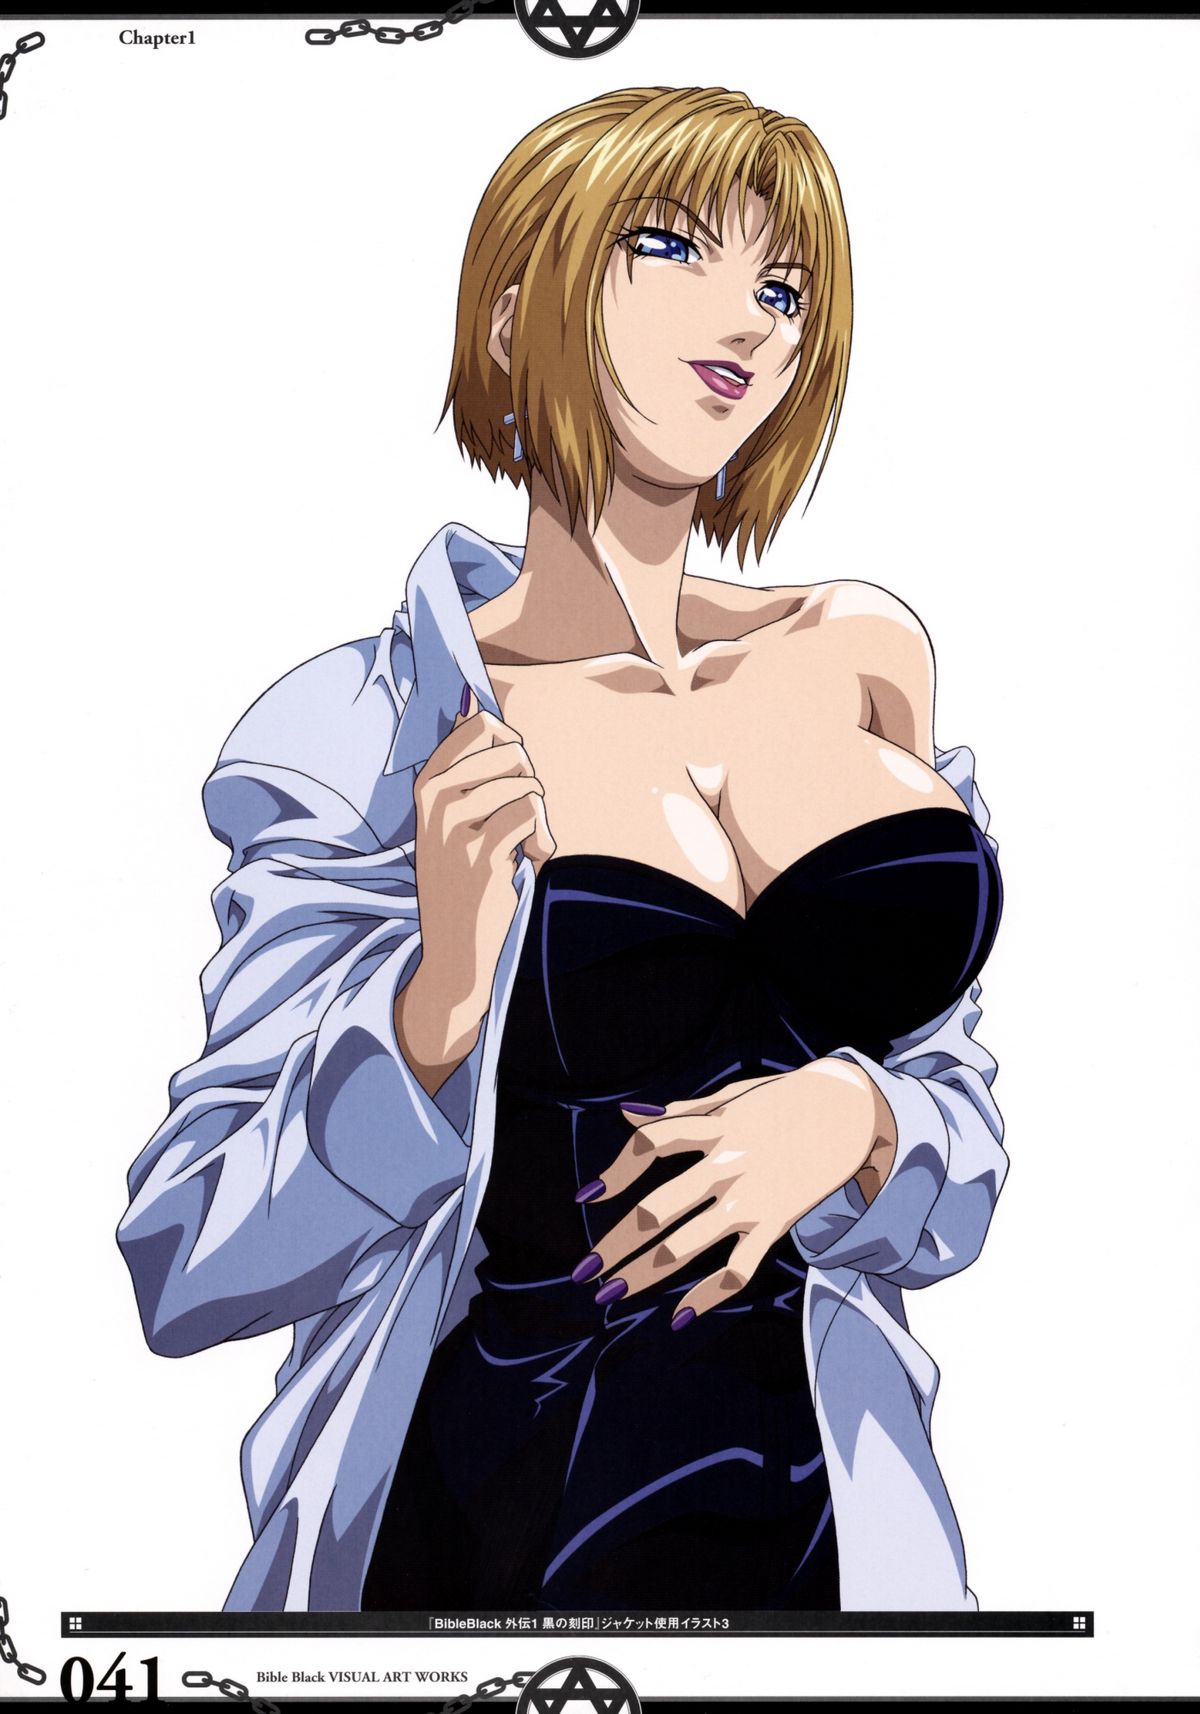 The Bible Black Visual Art Works page 50 full